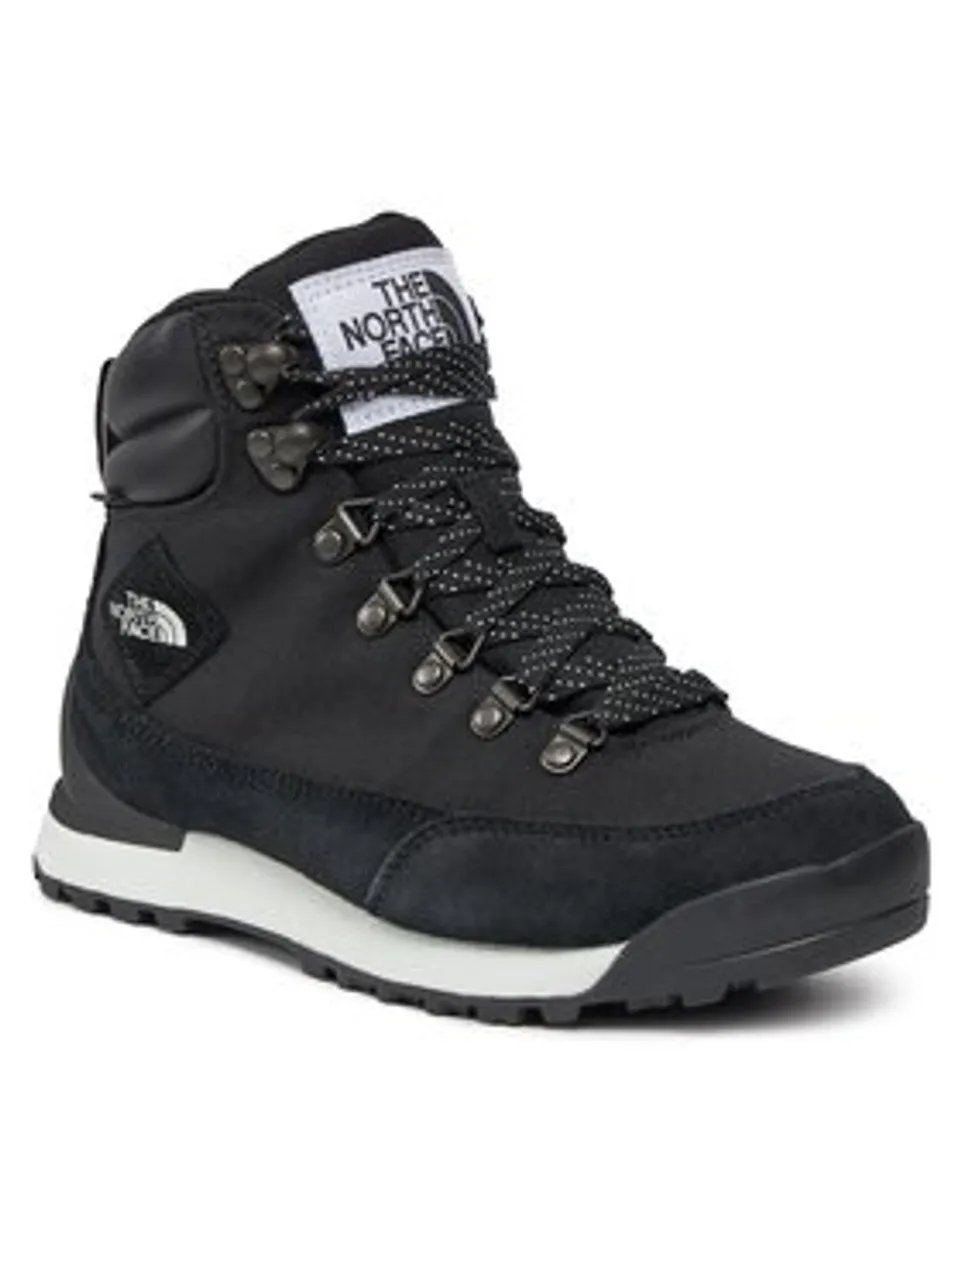 The North Face Trekkingschuhe W Back-To-Berkeley Iv Textile WpNF0A8179KY41 Schwarz